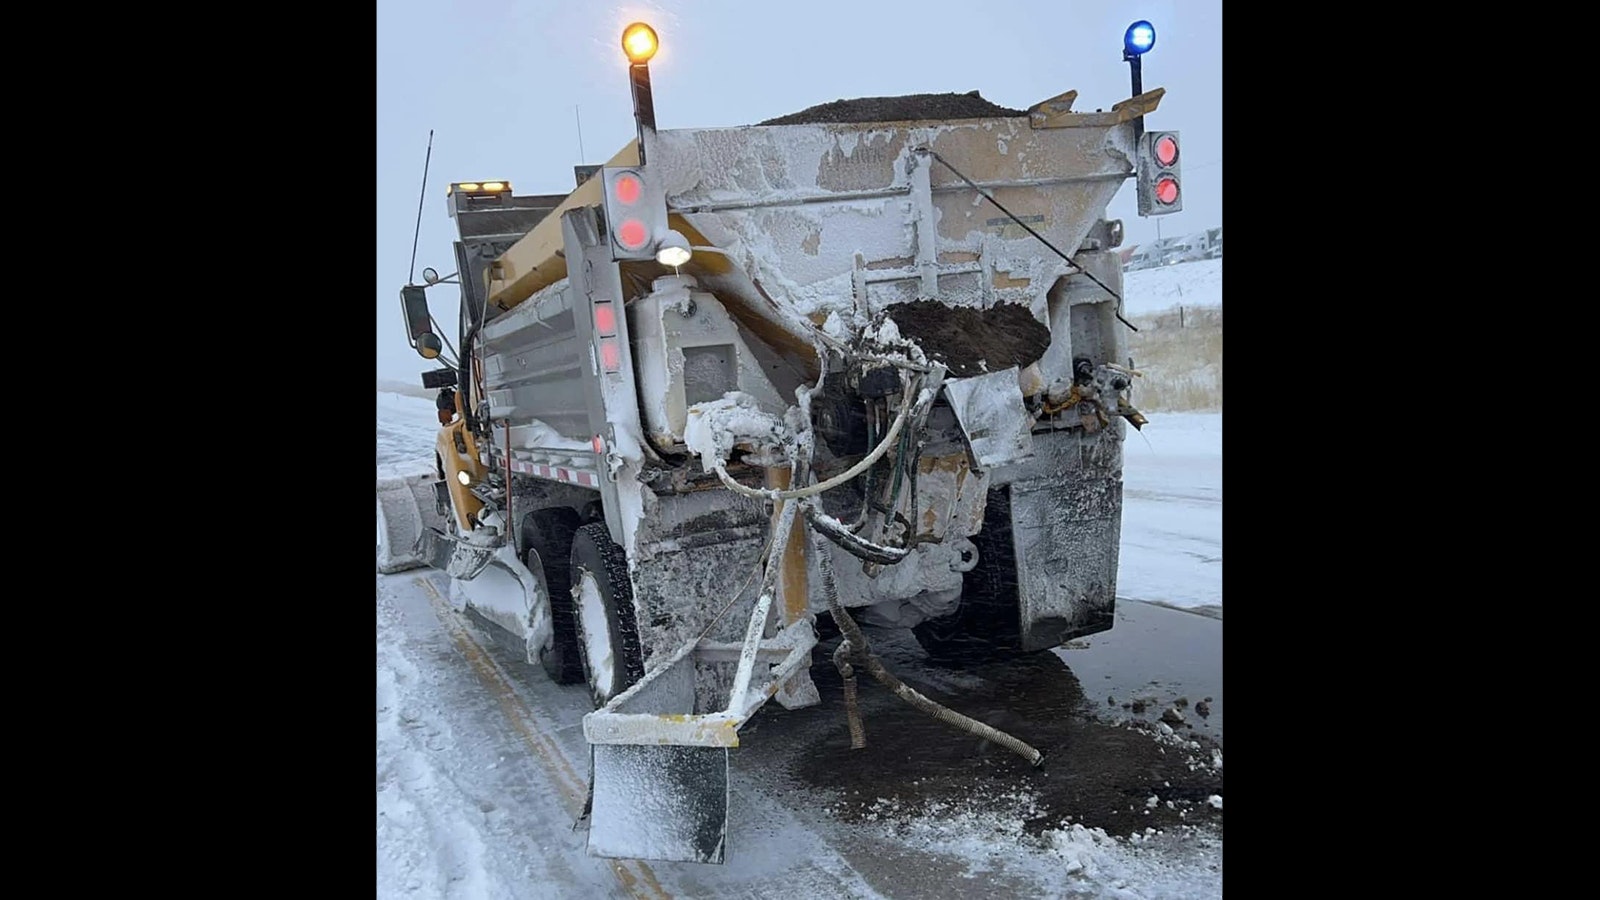 A snowplow that was hit from behind by a vehicle while clearing Interstate 80 near Baggs, Wyoming, during last weekend's storm.